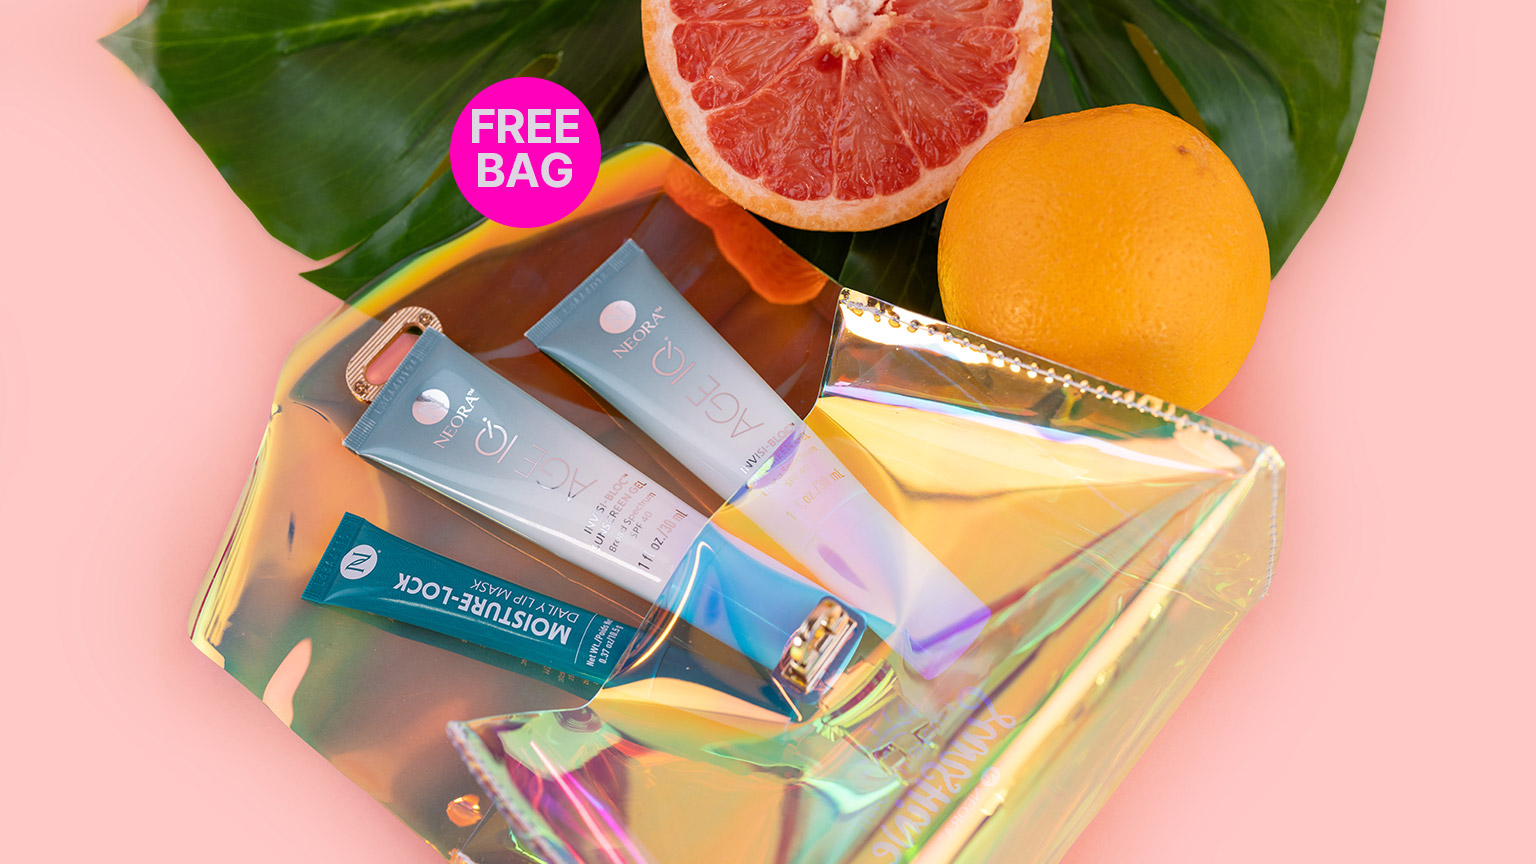 Neora’s Summer Skin Essentials Set, which includes two Age IQ Invisi-Bloc SPF40 Sunscreen Gels and a Moisture-Lock Lip Mask laying inside of a FREE Holographic Travel Bag next to a leaf and some grapefruit